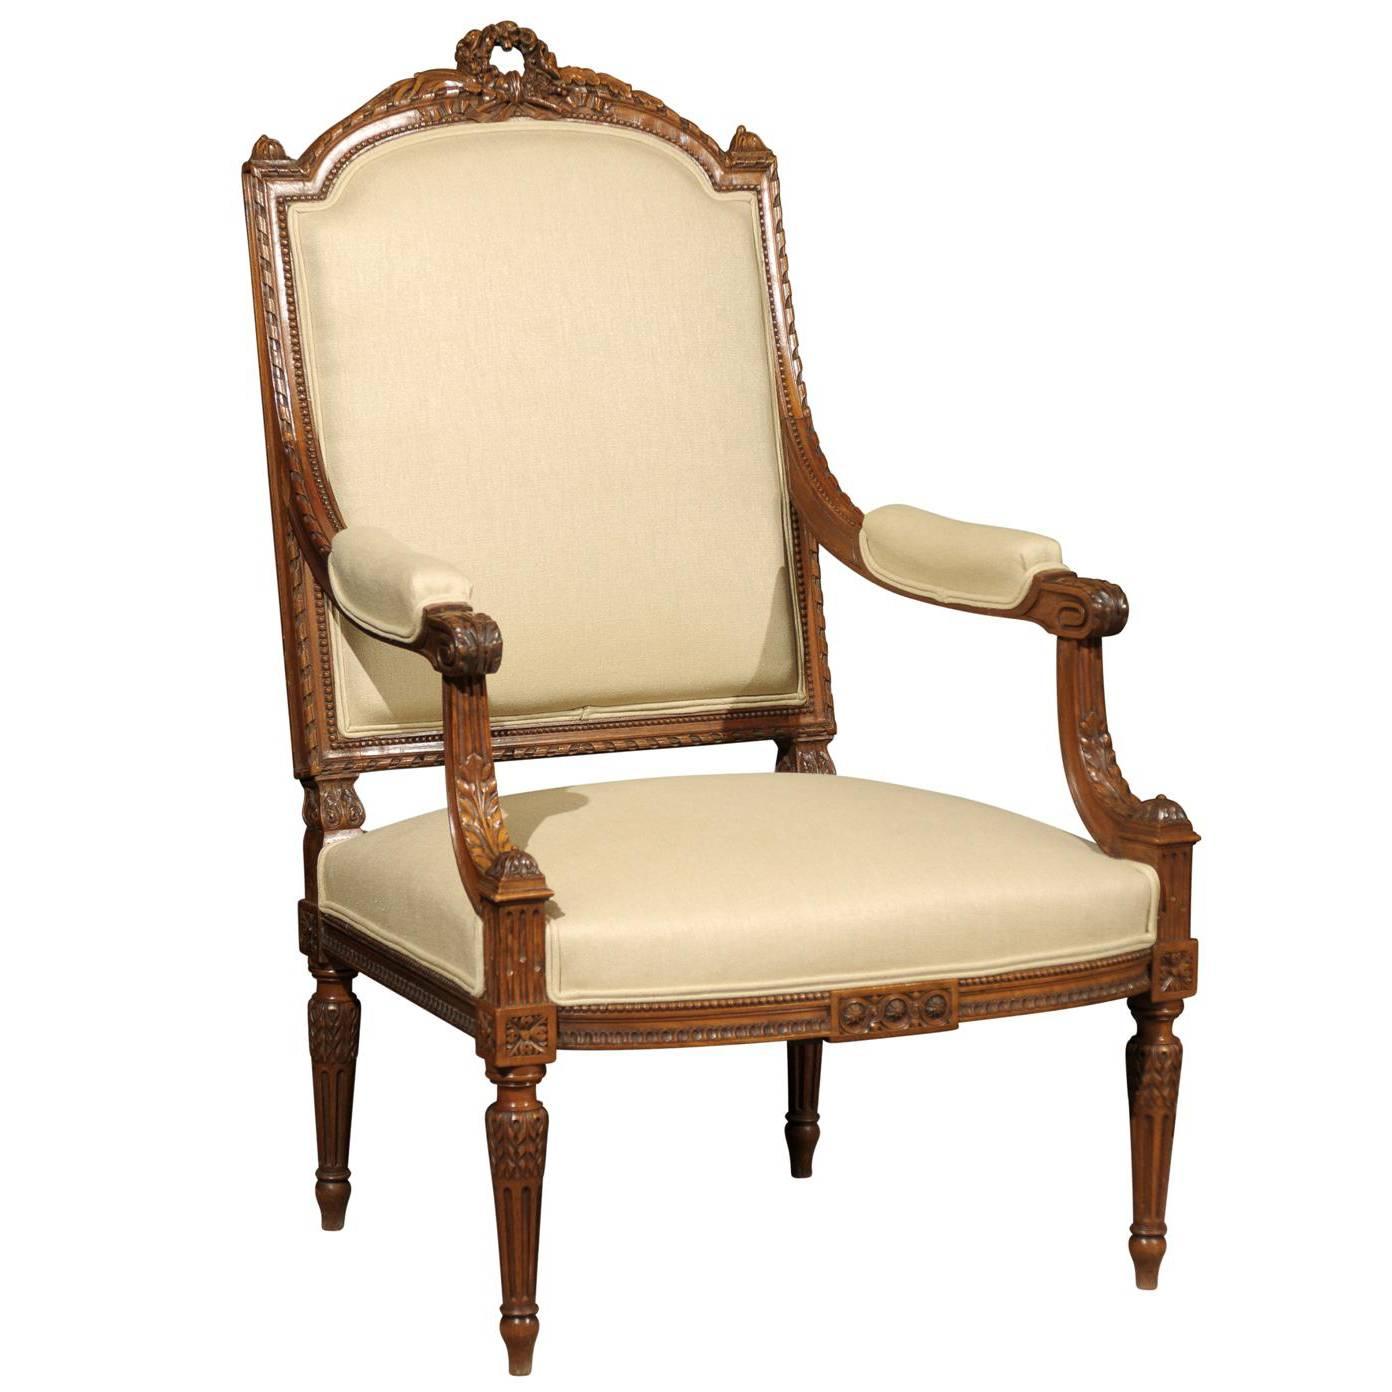 Single Antique Louis XVI Style Armchair in Walnut, circa 1870 For Sale